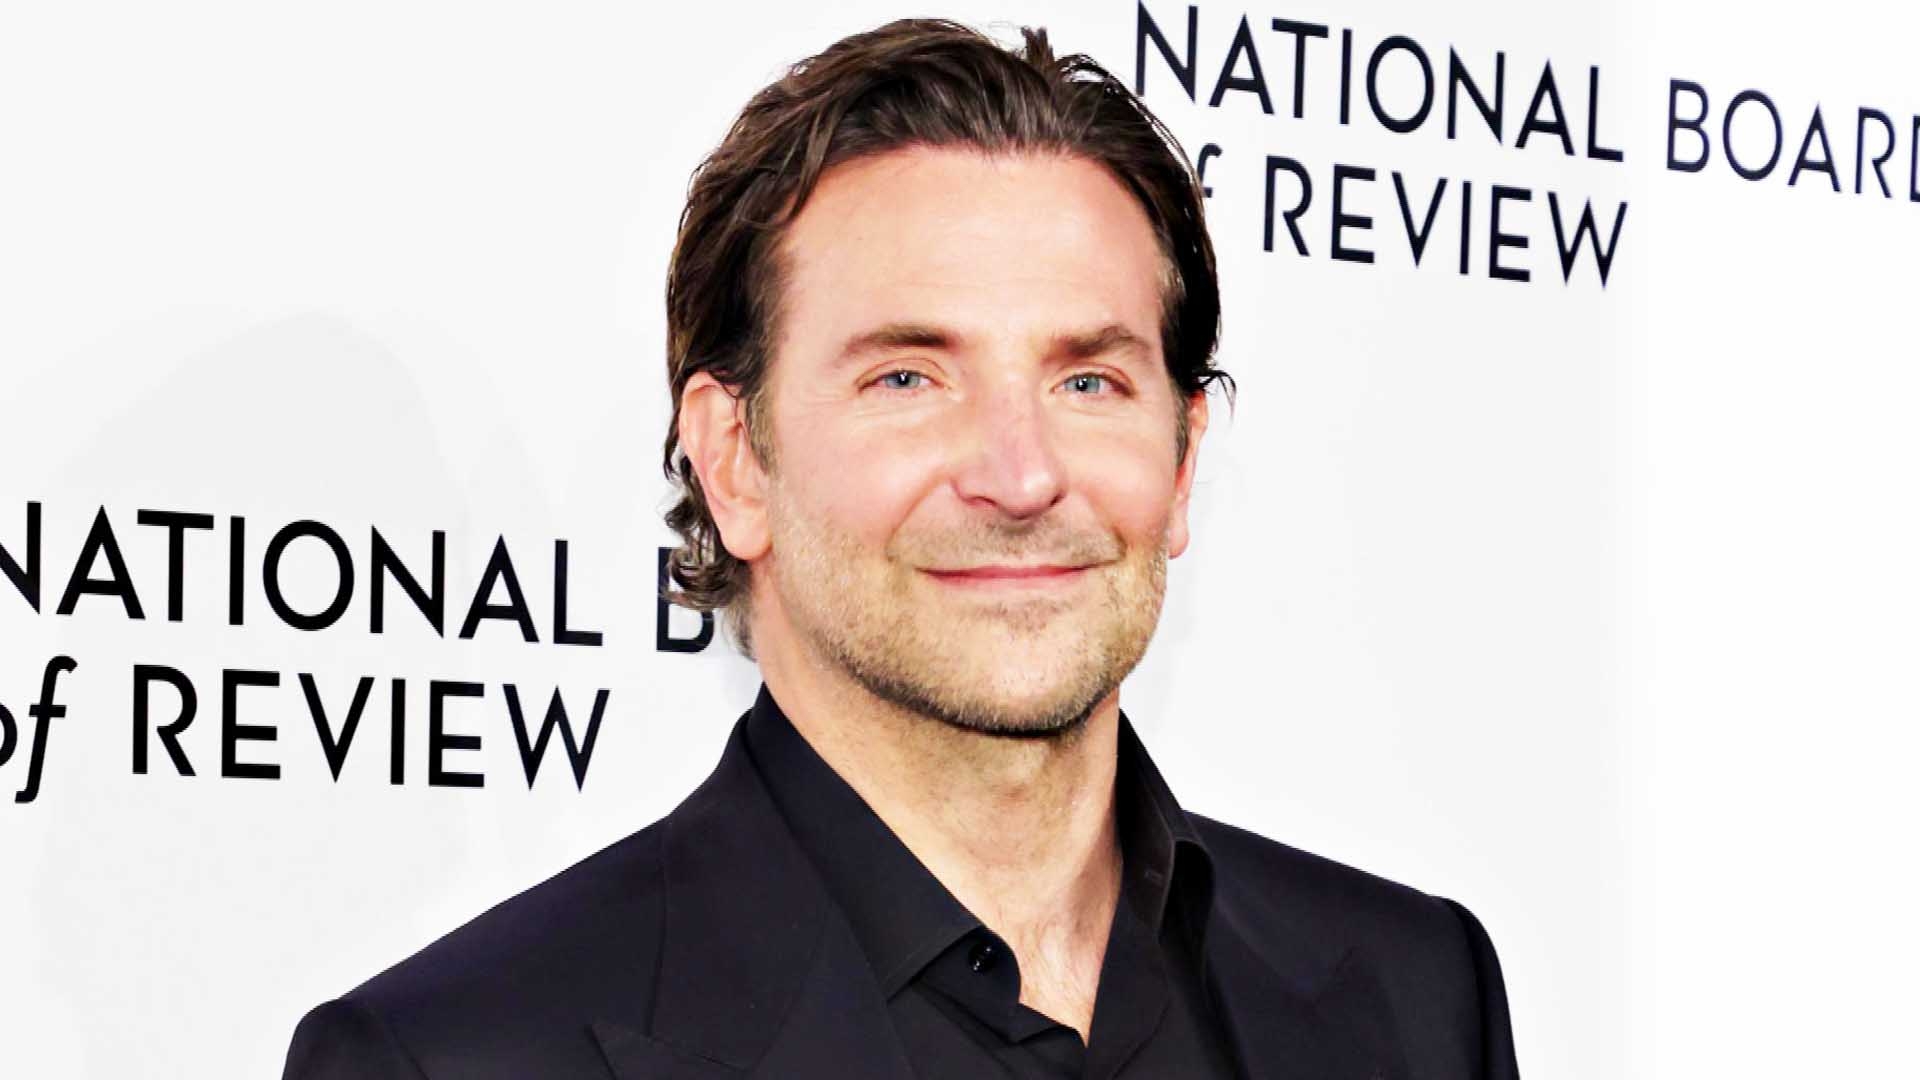 Bradley Cooper opens up again about his sobriety: 'I've been sober